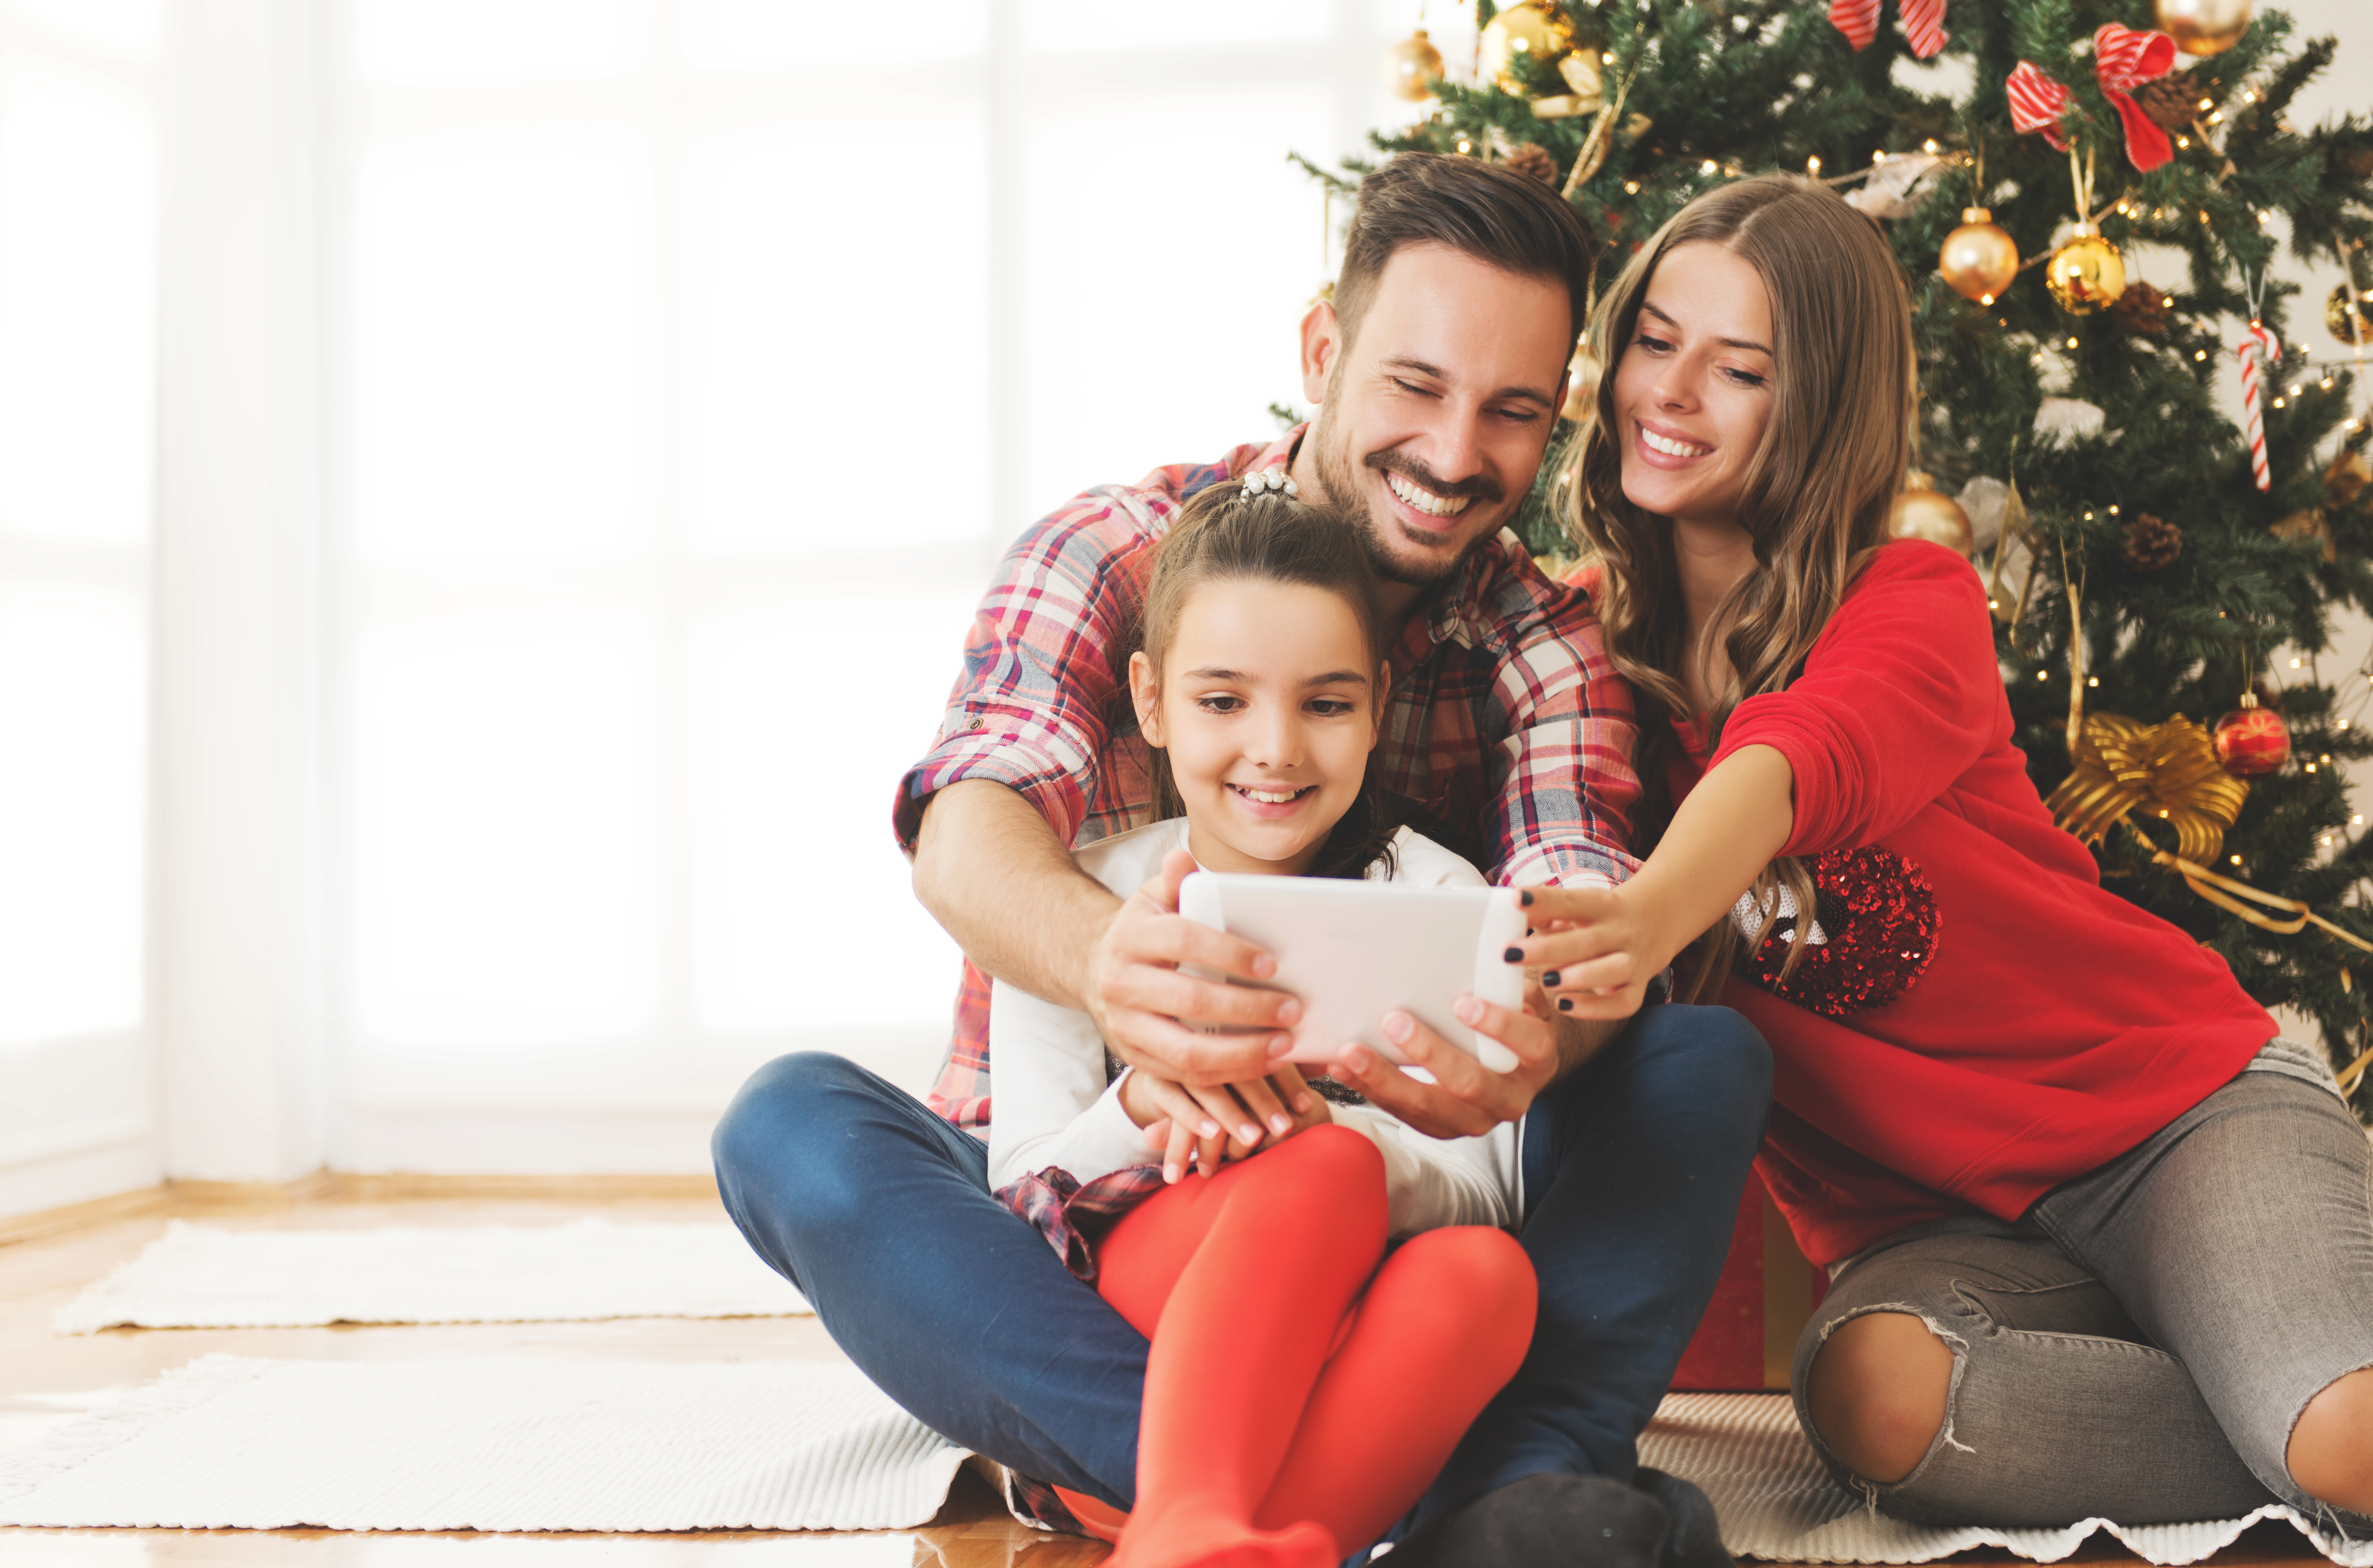 A little girl playing with an iPad with her father and mother with a Christmas tree in the background | Source: Shutterstock